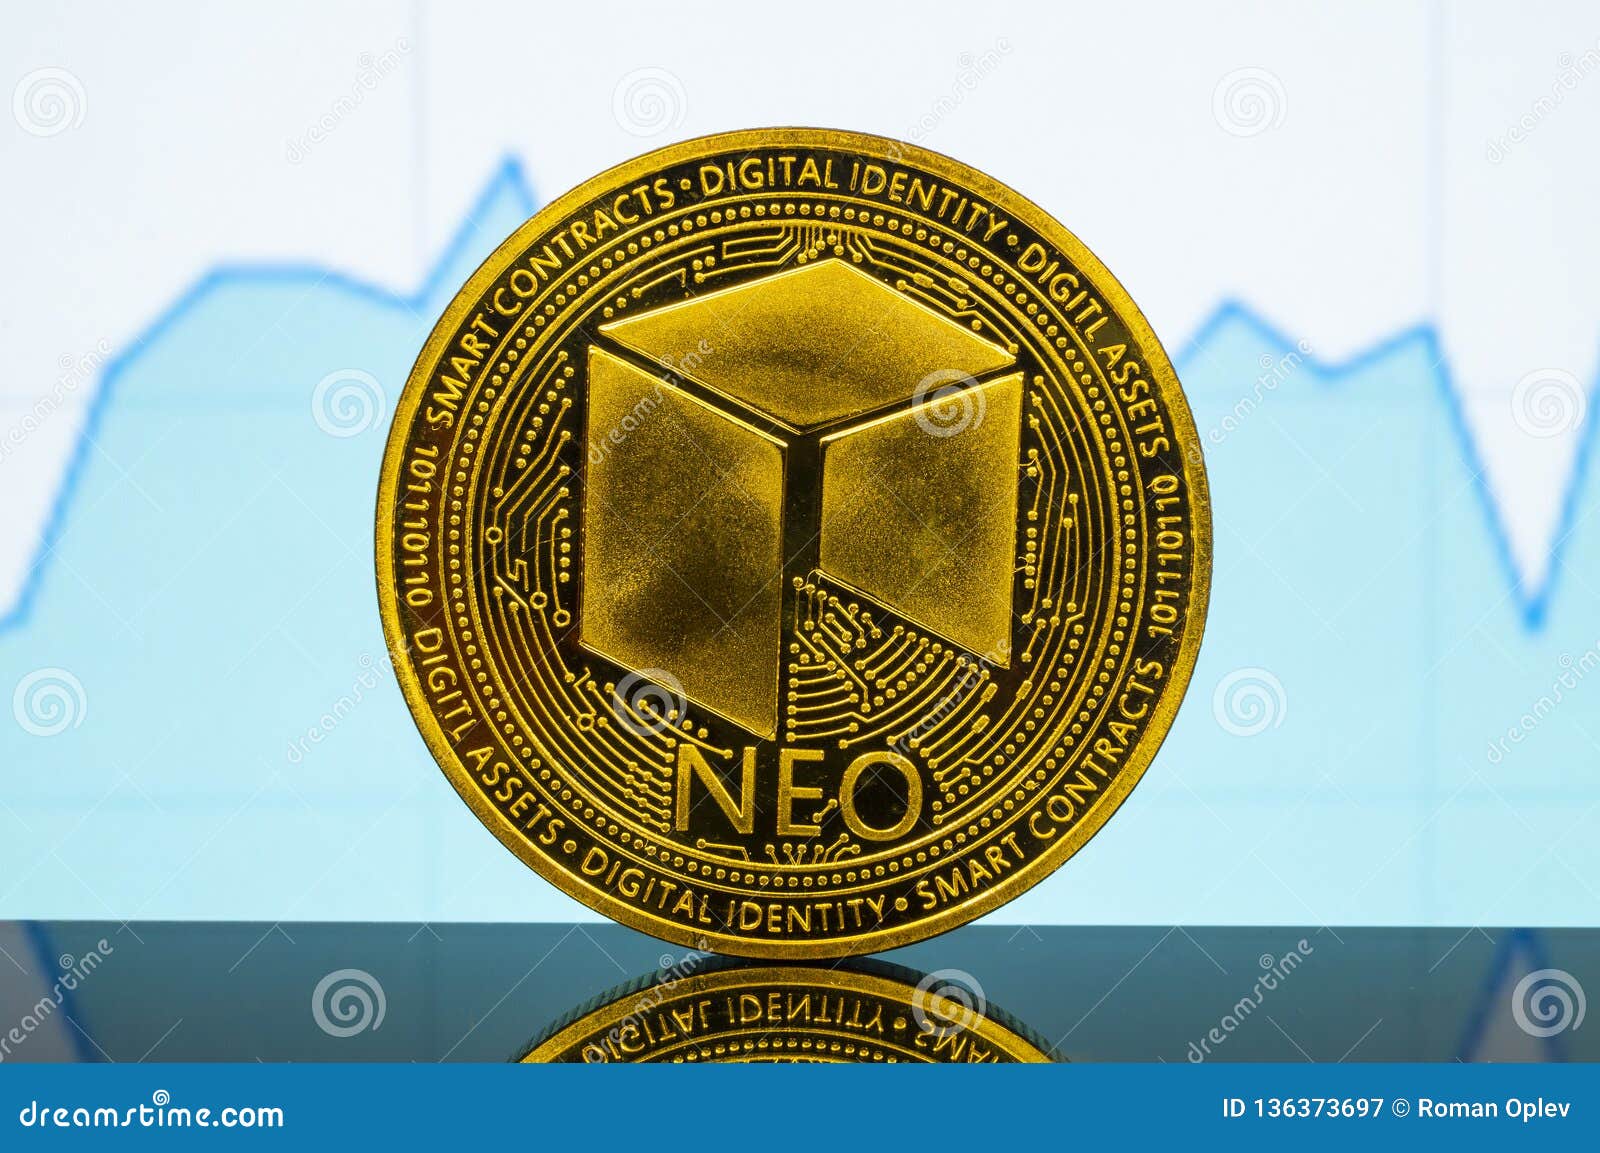 wher to buy neos crypto currency